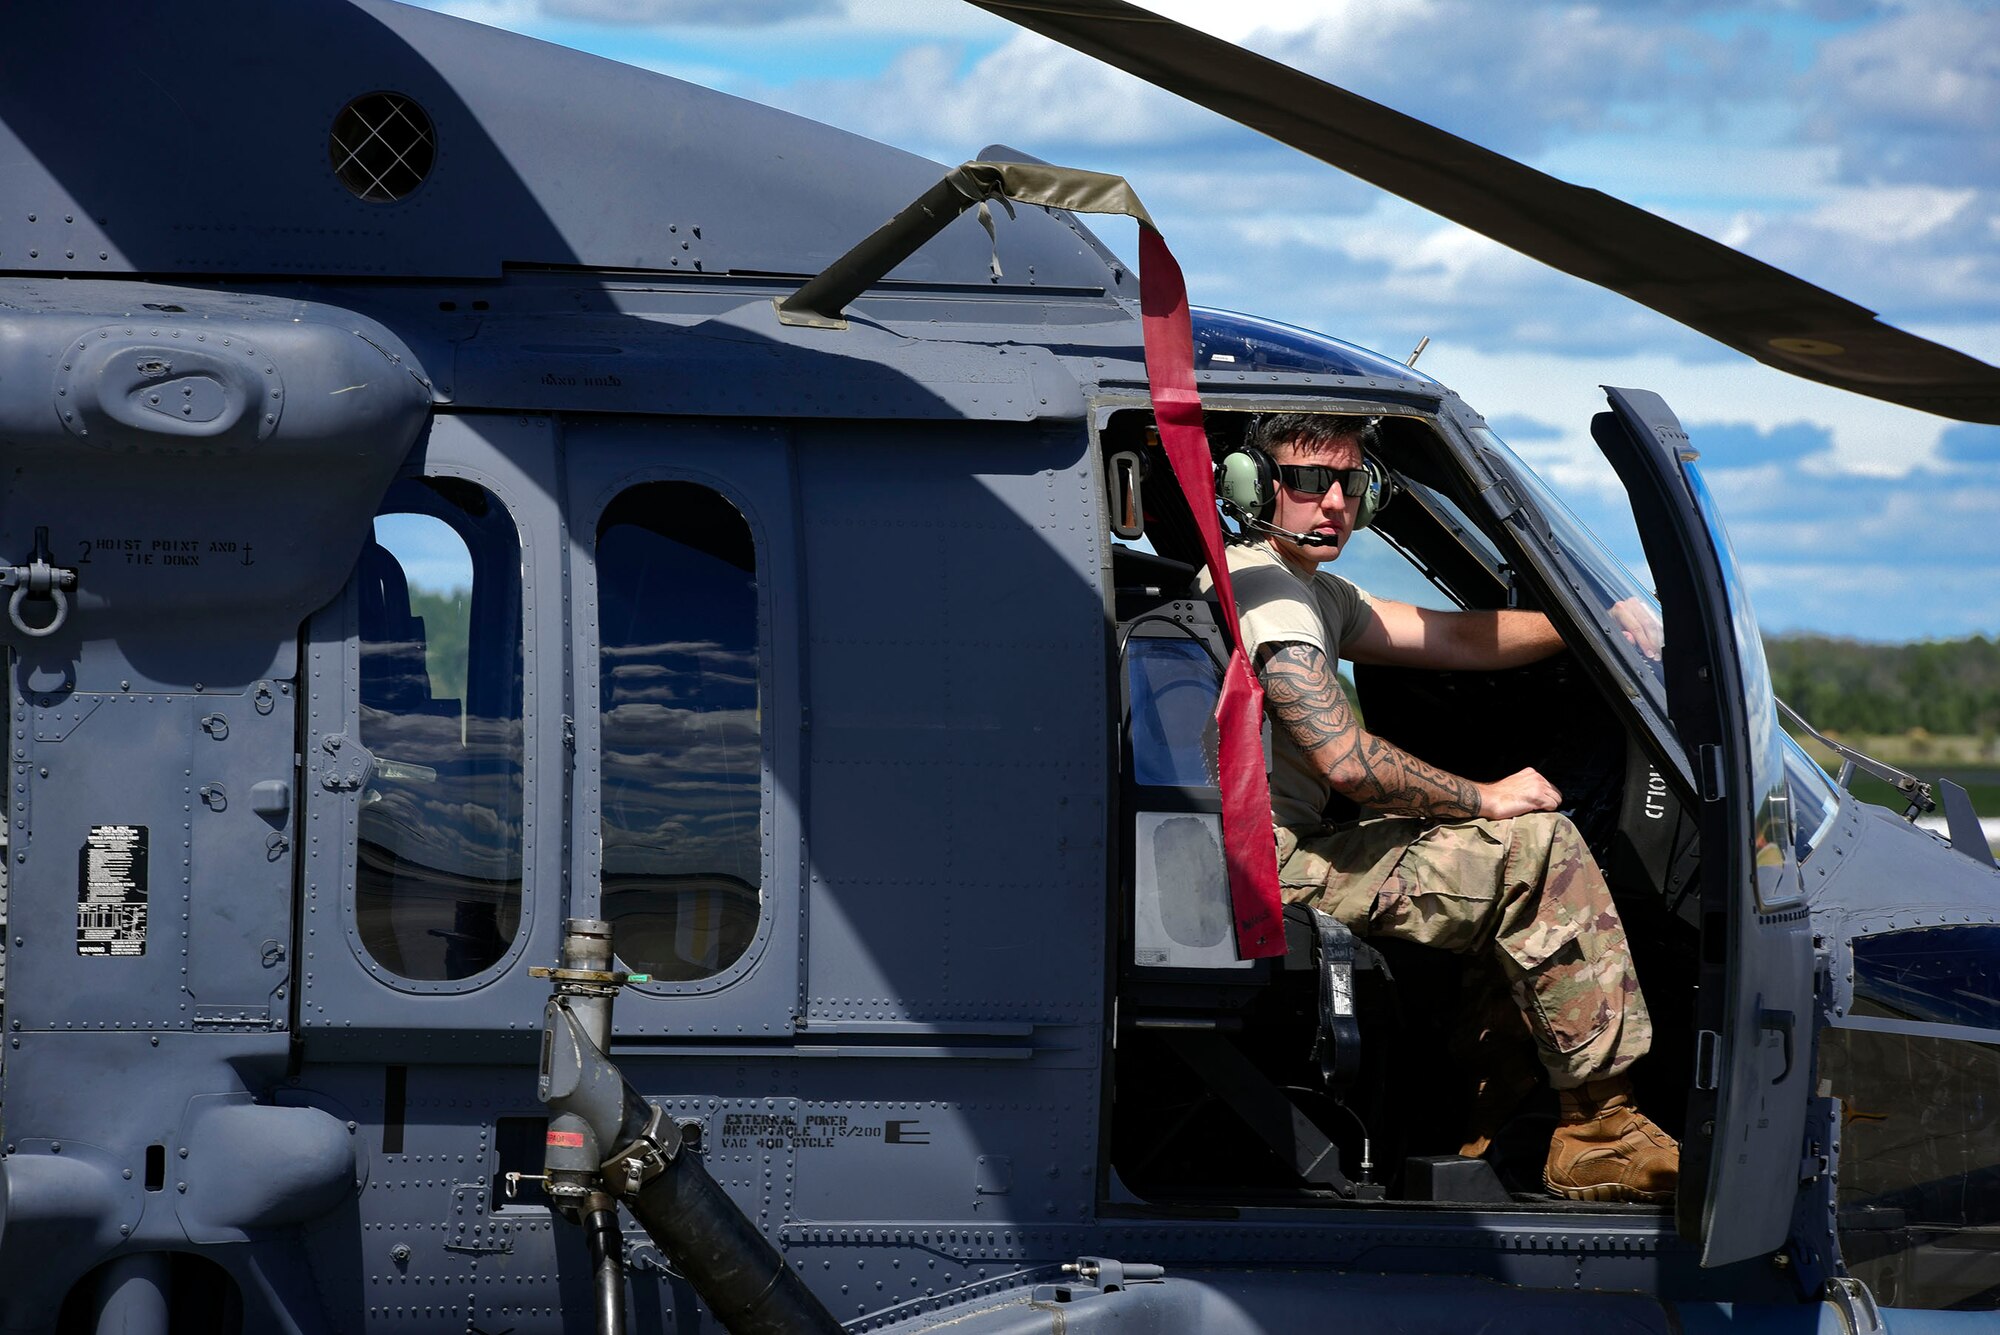 An Airman from the 41st Helicopter Maintenance Unit sits in an HH-60G Pavehawk helicopter, Sept. 15, 2018, at Moody Air Force Base, Ga. The 334th Air Expeditionary Group launched HC-130J Combat King IIs, HH-60G Pavehawks, aircrew and support personnel to pre-position at Joint Base Charleston, S.C., for potential Tropical Storm Florence response. Under the command of Col. John Creel, the 374th Rescue Group commander, the AEG integrated to make one expeditionary search and rescue unit comprised of rescue and support personnel from both the 23d Wing, 920th Rescue Wing at Patrick Air Force Base, Fla., and 51st Combat Communications Squadron at Robins Air Force Base, Ga. (U.S. Air Force photo by Senior Airman Greg Nash)